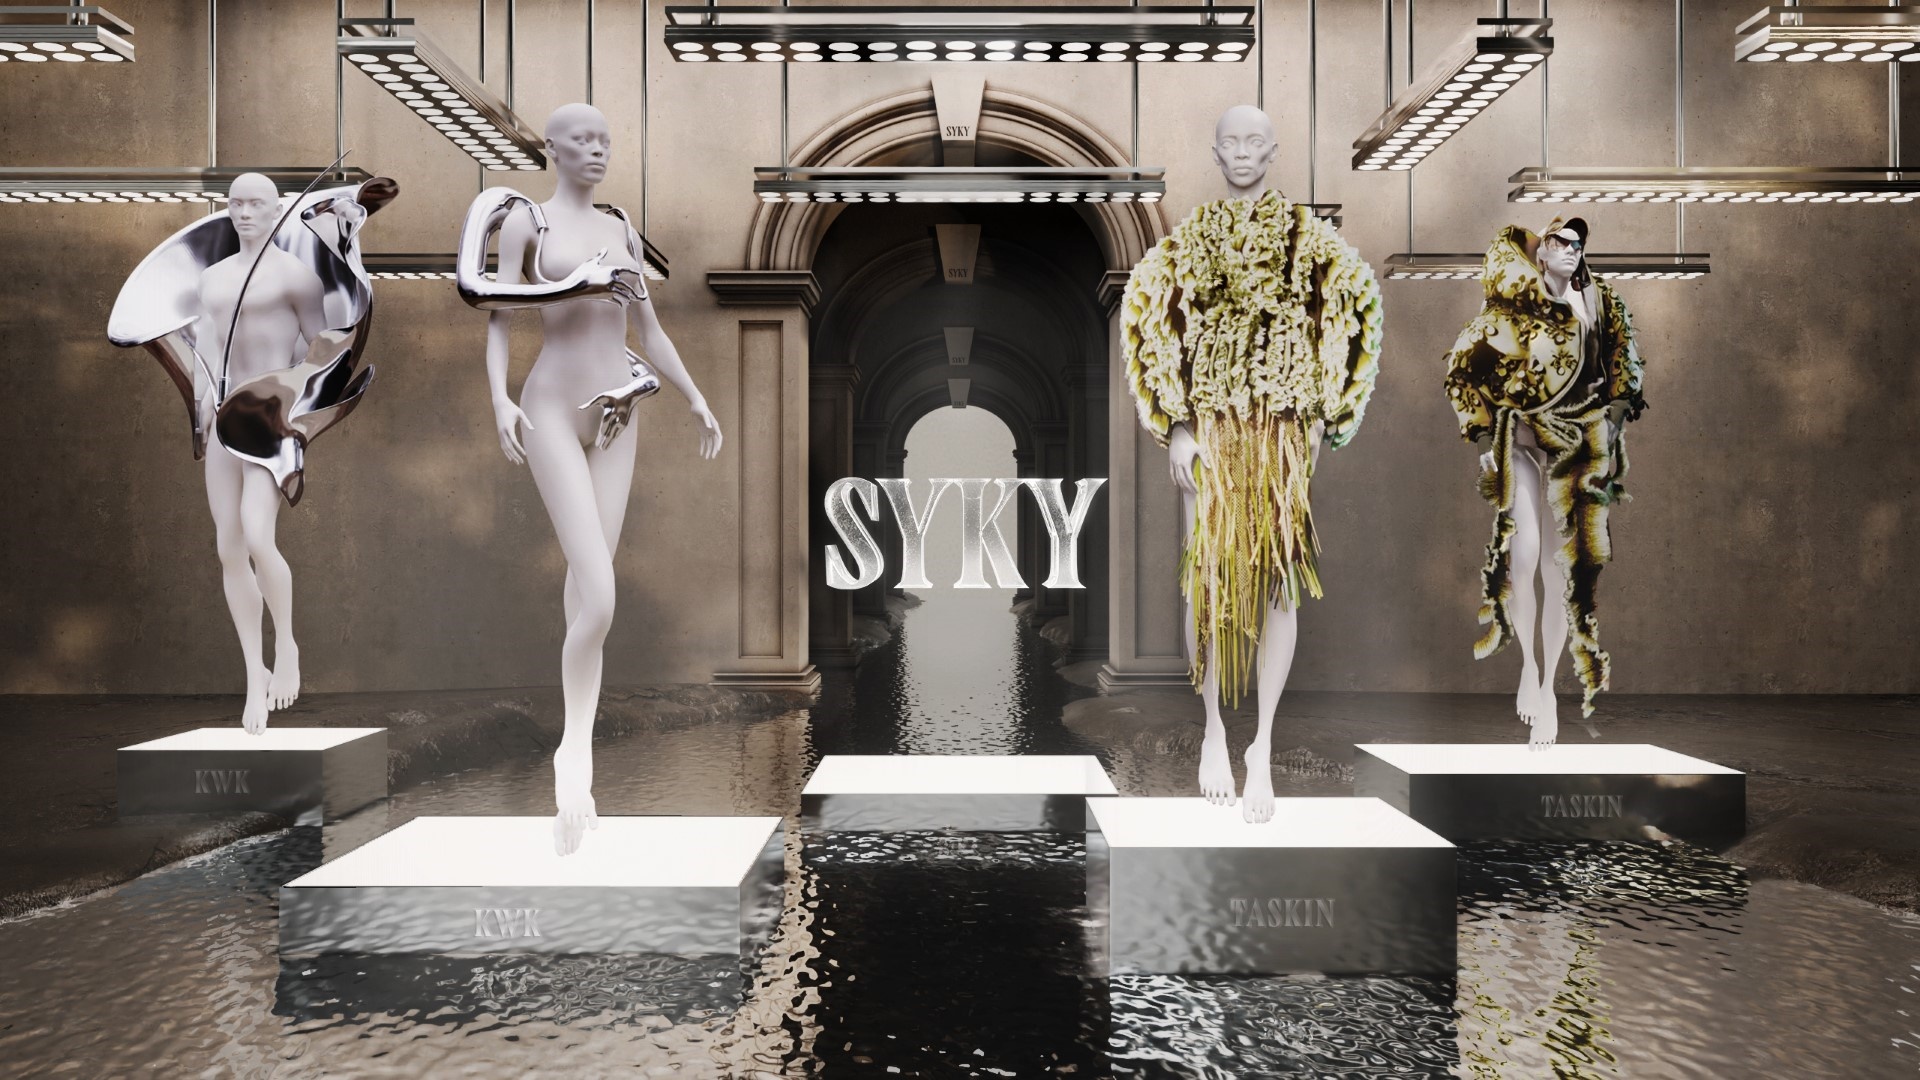 SYKY’s LFW event unveiled new works from KWK by Kay Kwok and Taskin Goec. Photo: SYKY